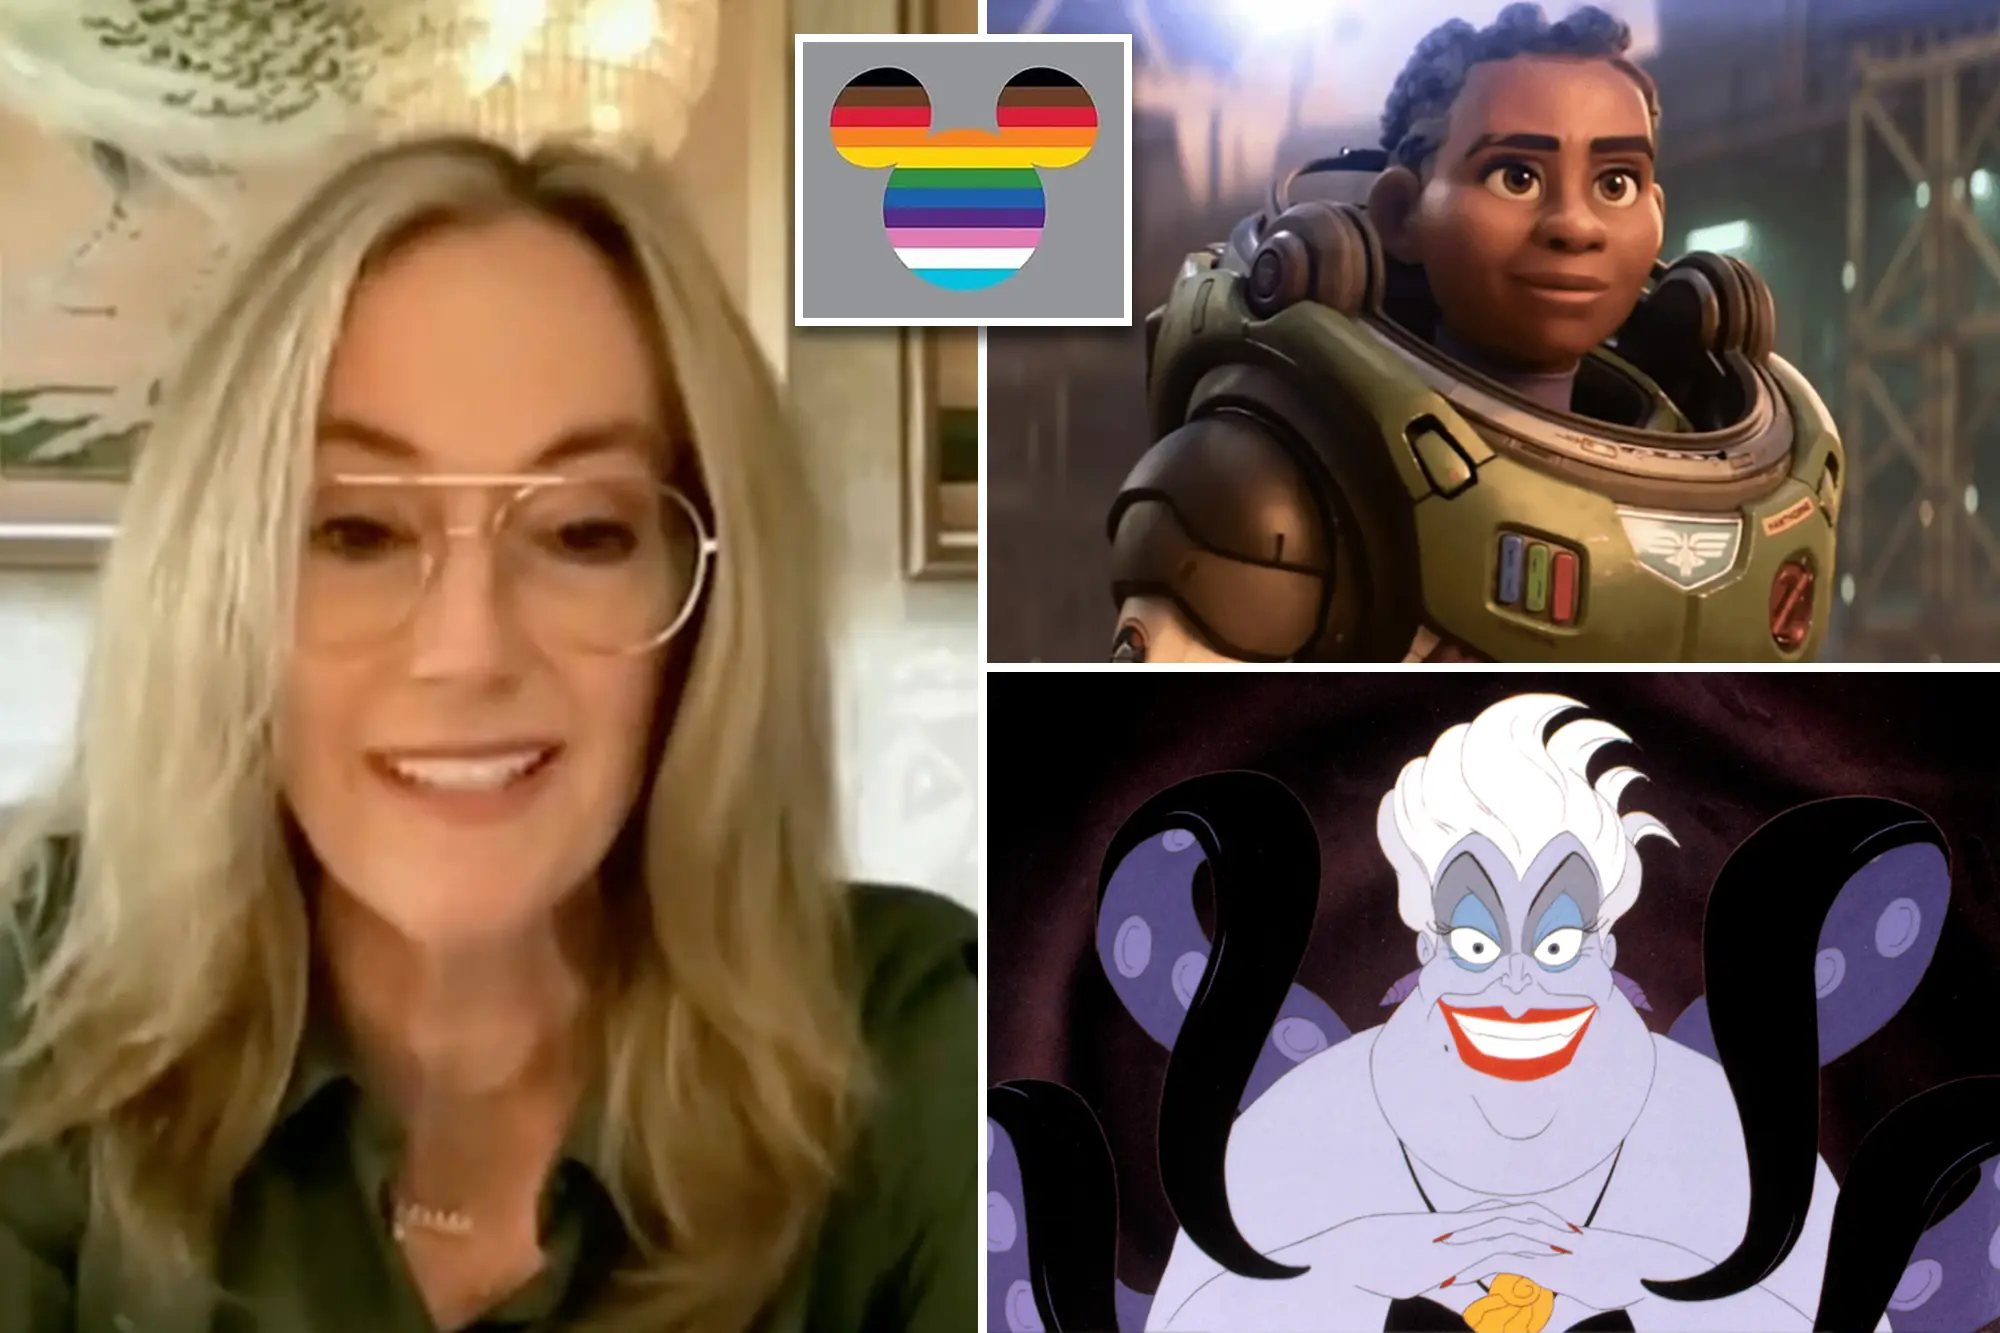 Disney exec announces creation of more LGBTQ and minority content for kids